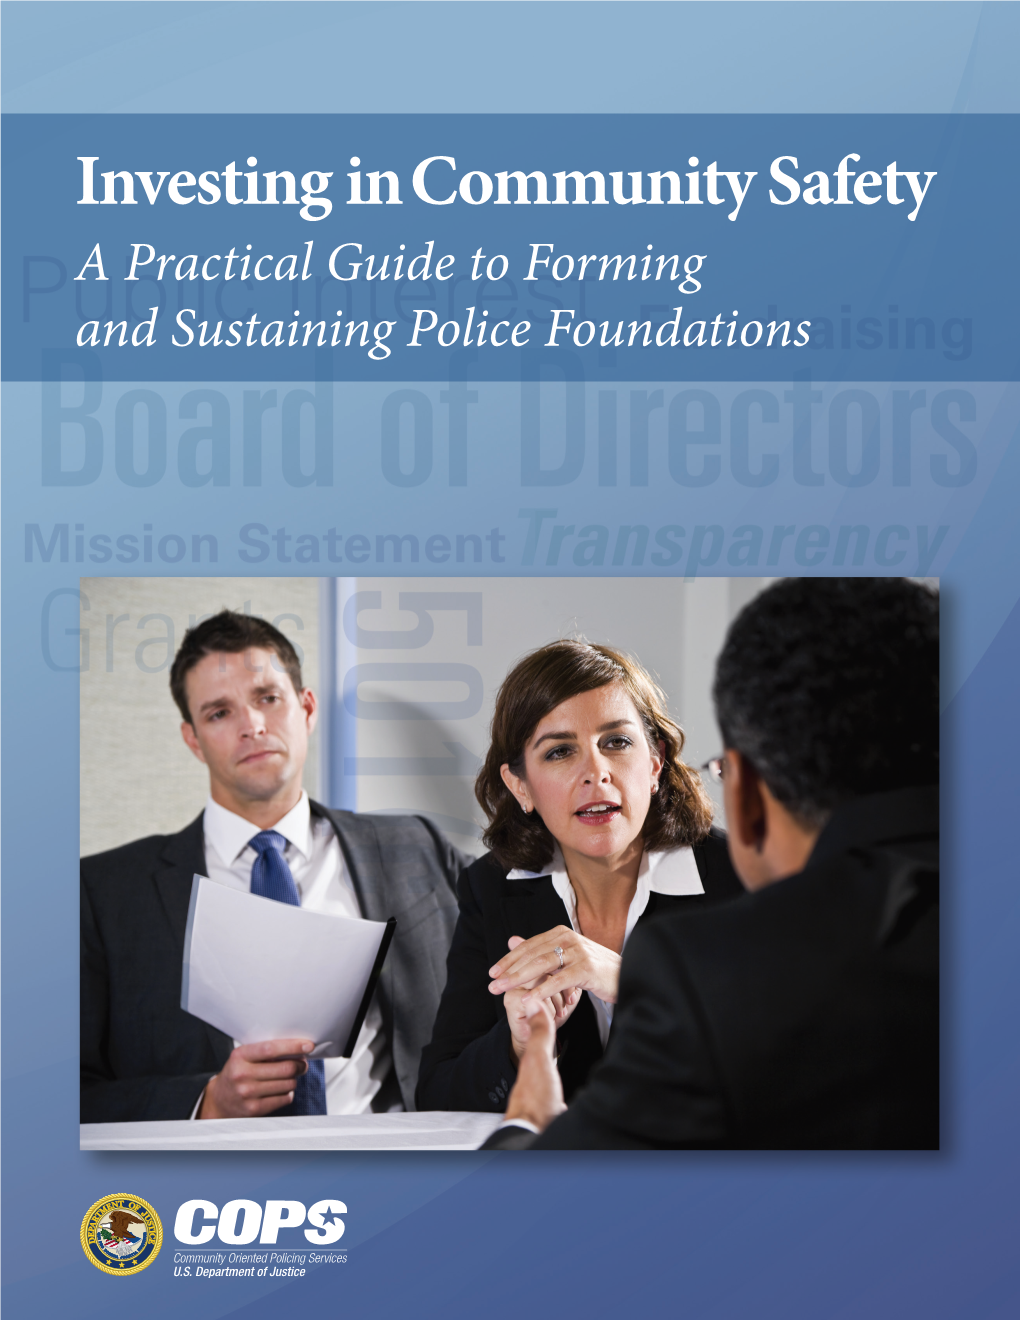 Investing in Community Safety: a Practical Guide to Forming and Sustaining Police Foundations